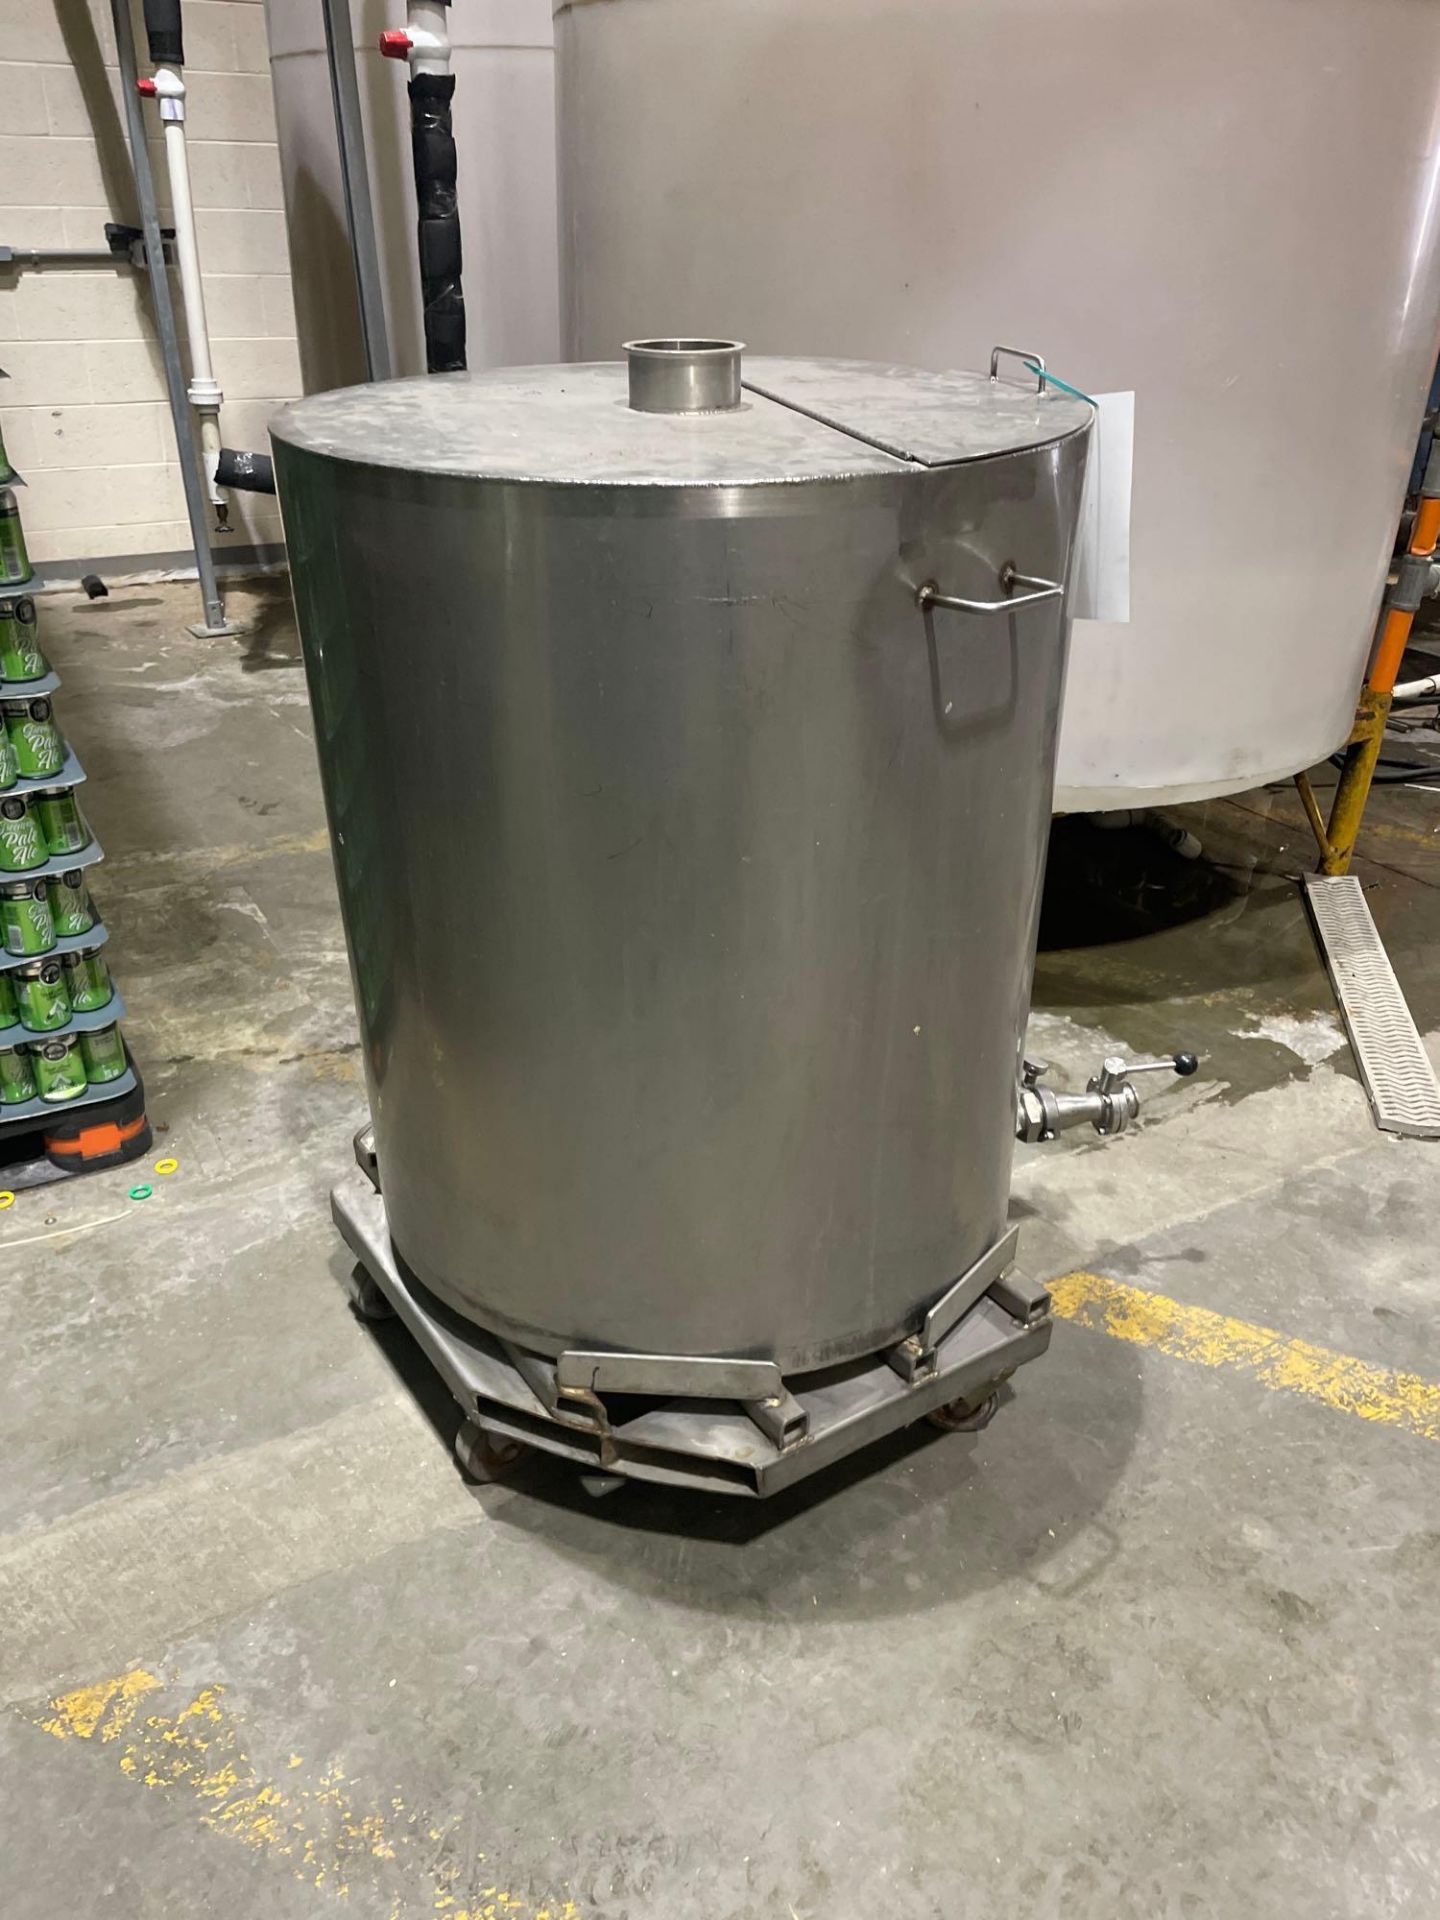 Stainless Steel Holding Tank w/ Casters - Image 2 of 5